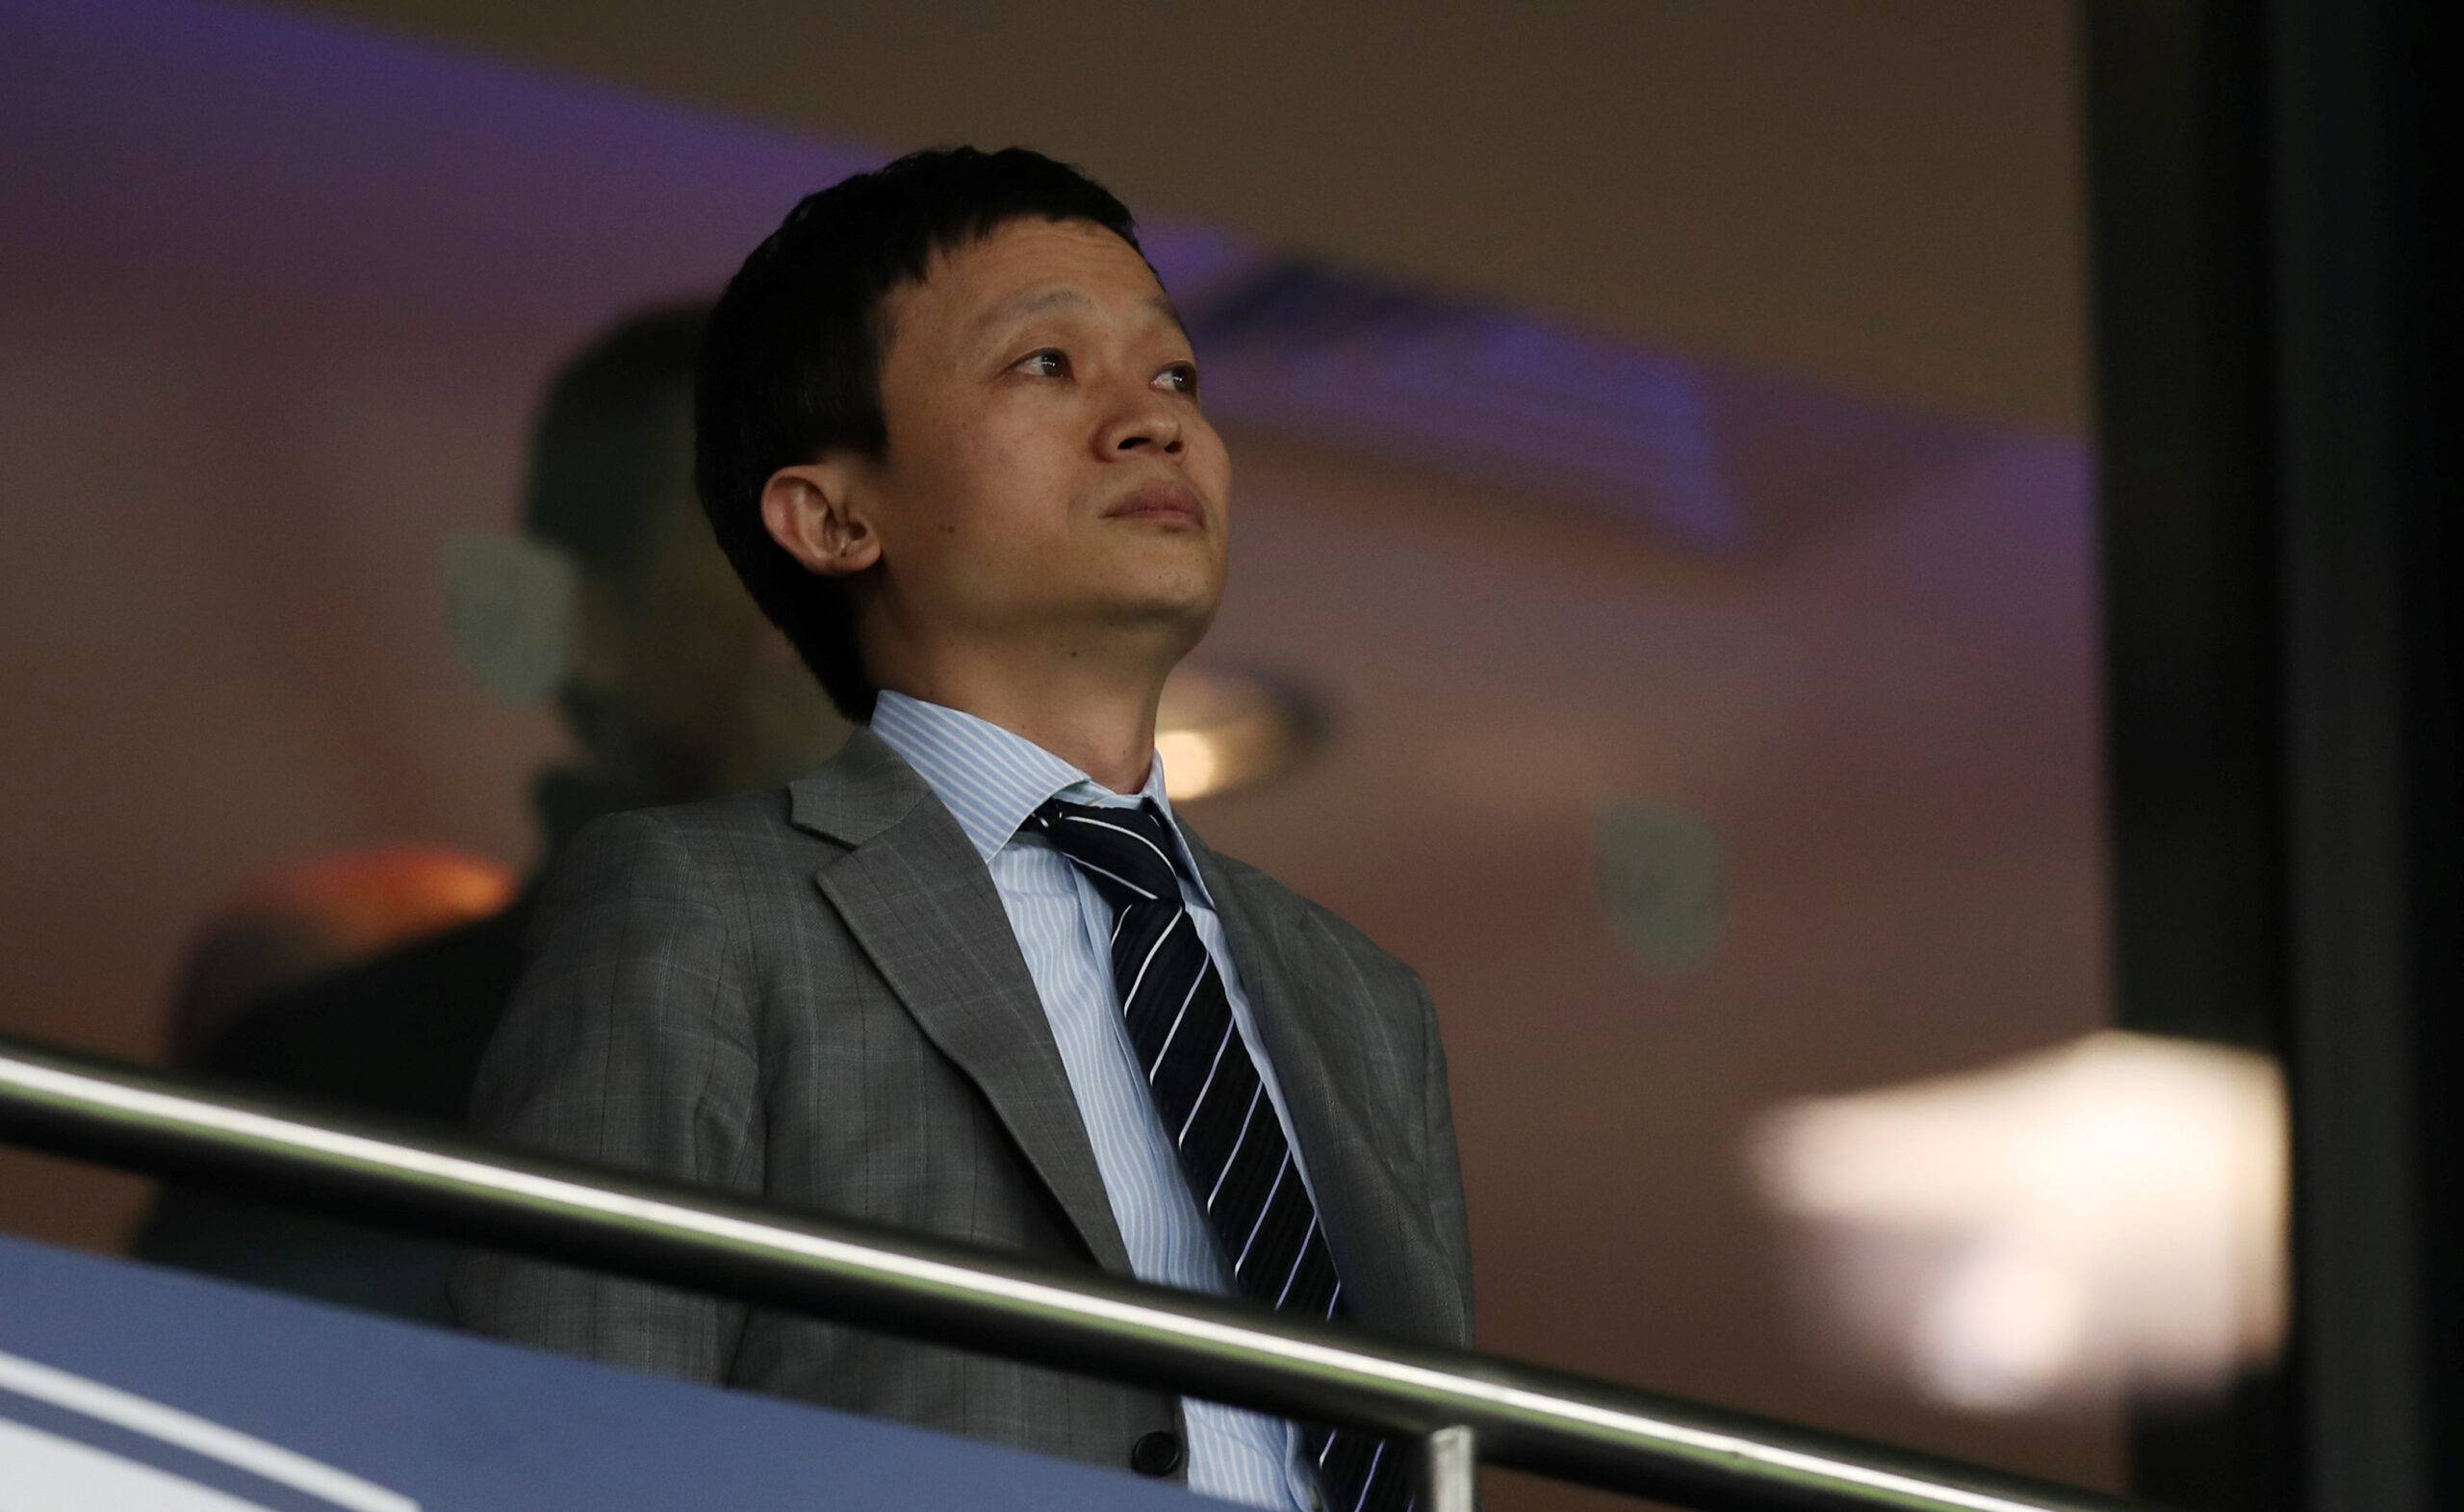 West Brom owner Lai Guochuan